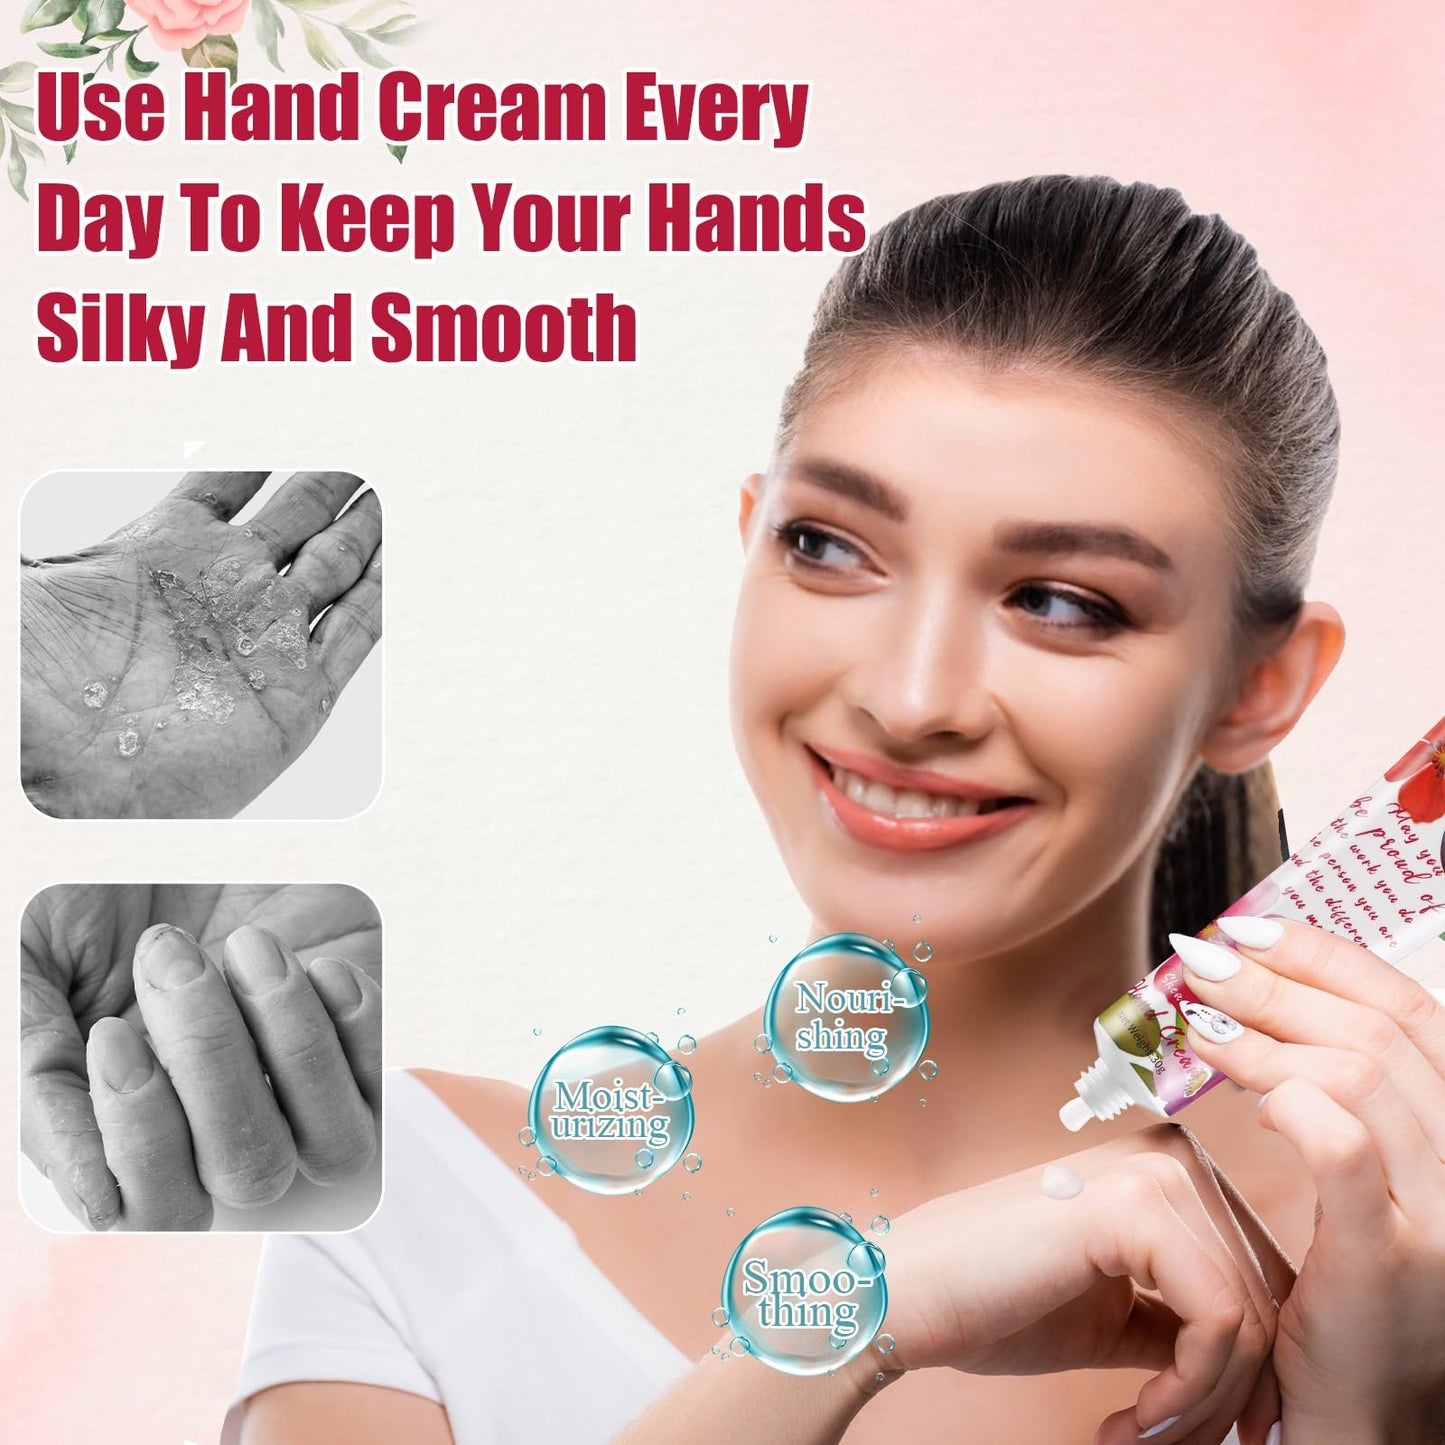 Dansib Bulk Hand Cream Gifts for Women Employee Teacher Appreciation Gifts Mothers Day Nurse Week Gifts Travel Size Hand Lotion Thank You Gifts for Staff Coworker Volunteer(12 Pcs)